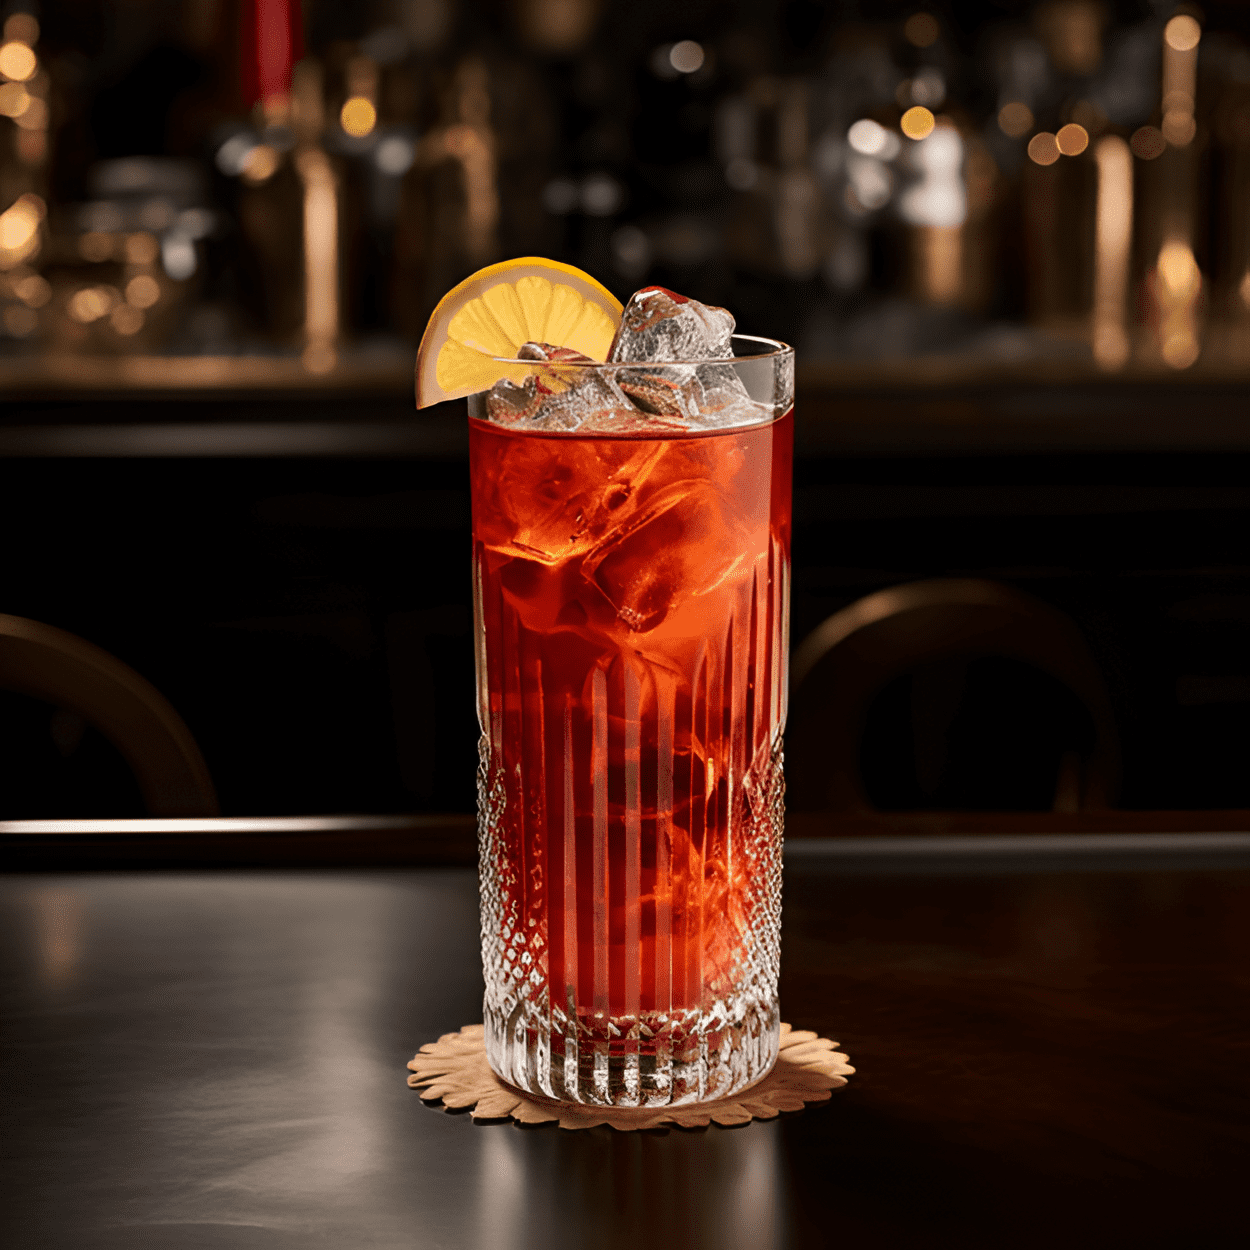 Americano Highball Cocktail Recipe - The Americano Highball has a balanced taste, with a slightly bitter and herbal flavor from the Campari, sweetness from the vermouth, and a refreshing fizziness from the club soda. It's light, crisp, and perfect for sipping on a hot day.